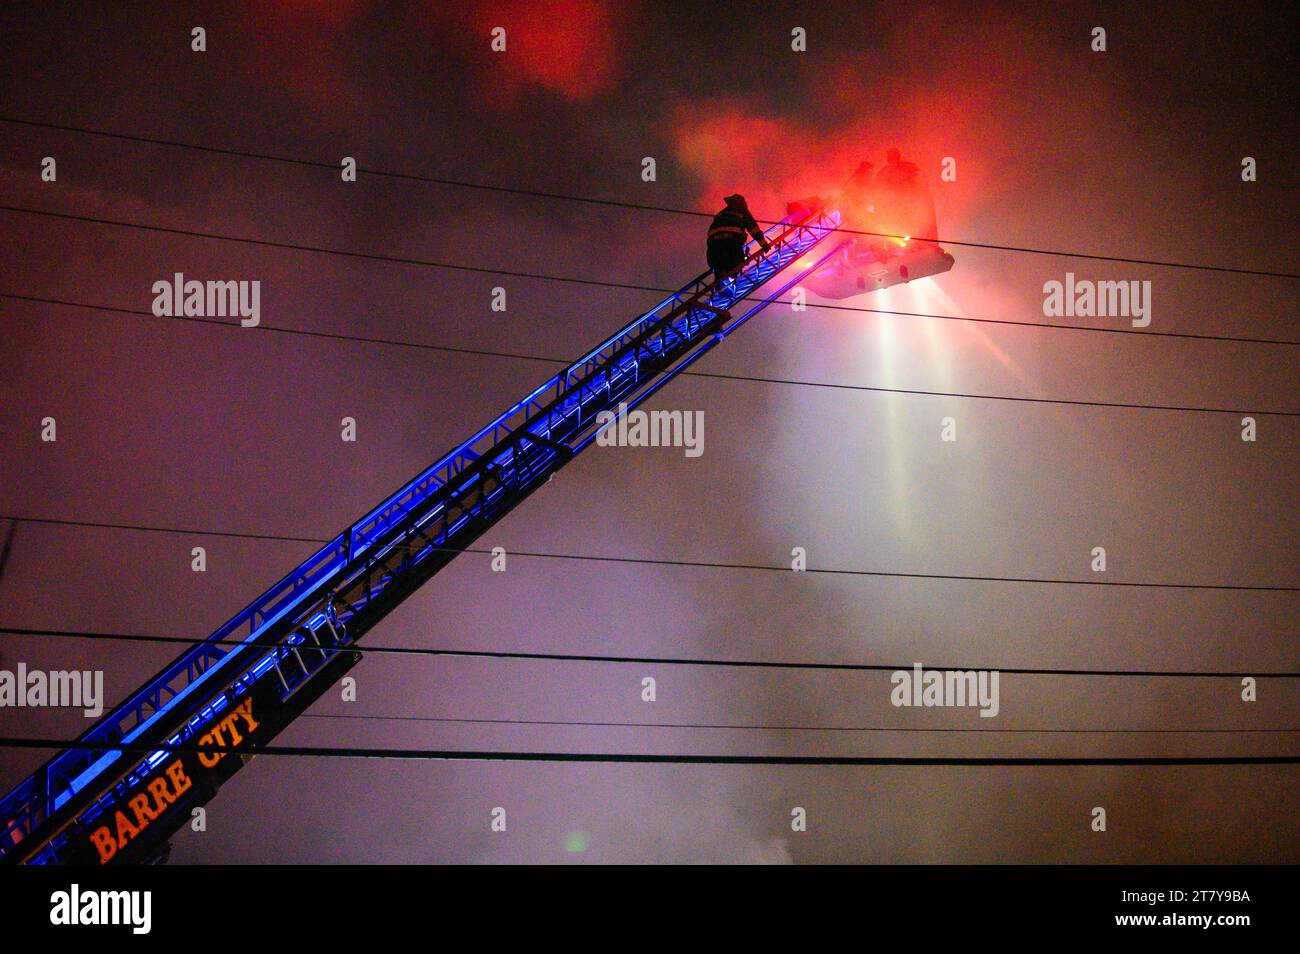 Fire fighters firemen on long ladders in action to fight a spectacular blase at the RK Miles lumberyard in Montpelier, VT, New England, USA. Stock Photo